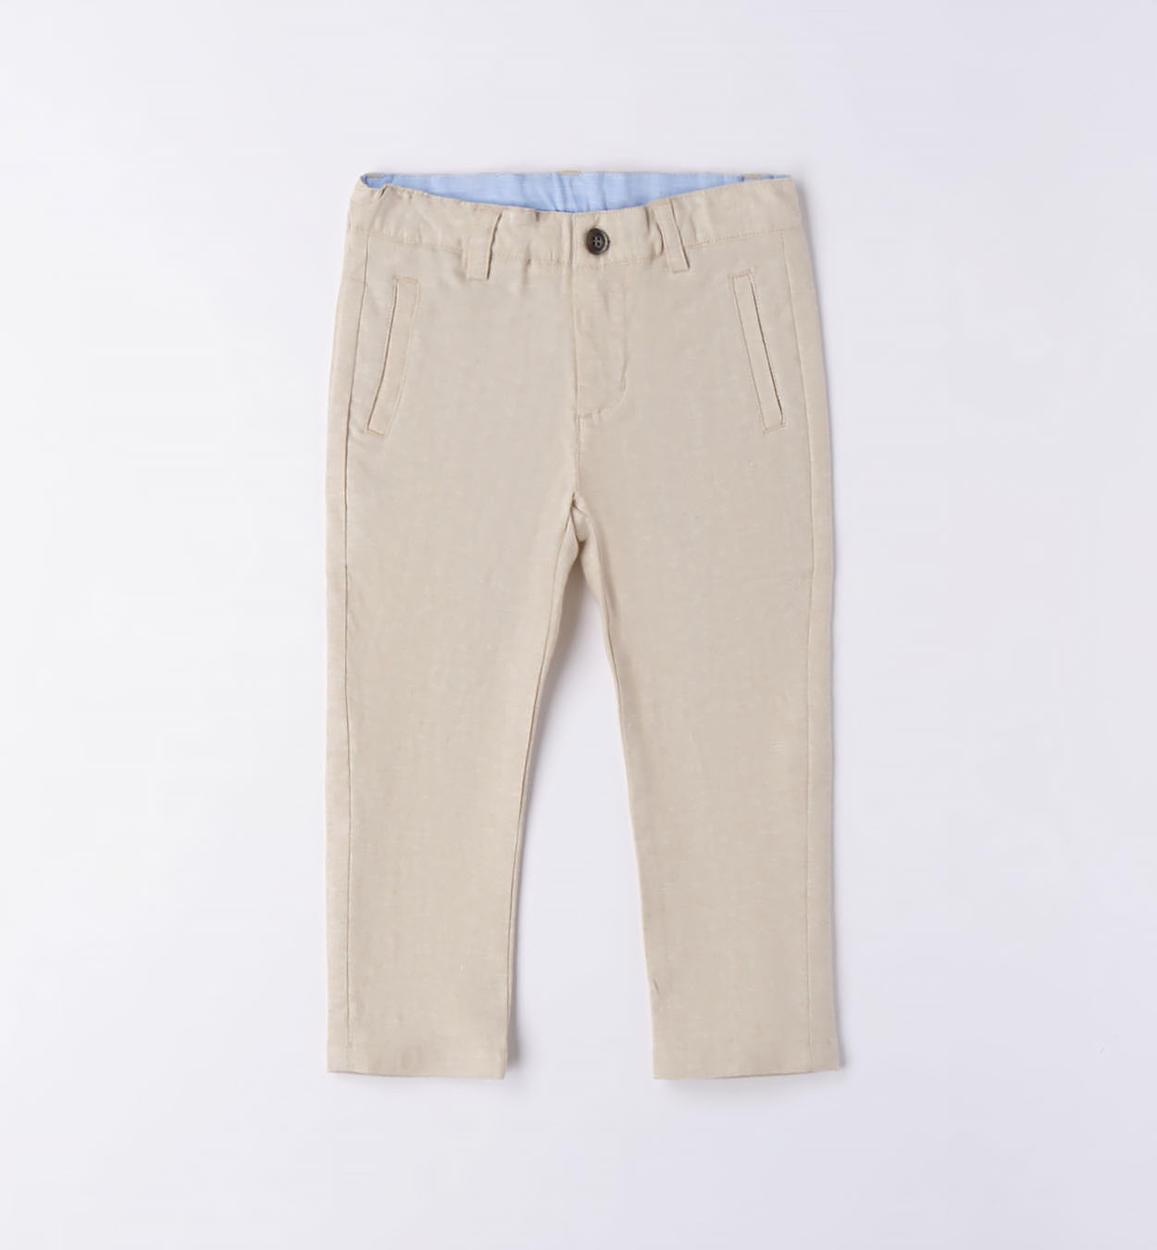 Boys Trousers  Formal Casual Chinos Pants  Indian Terrain